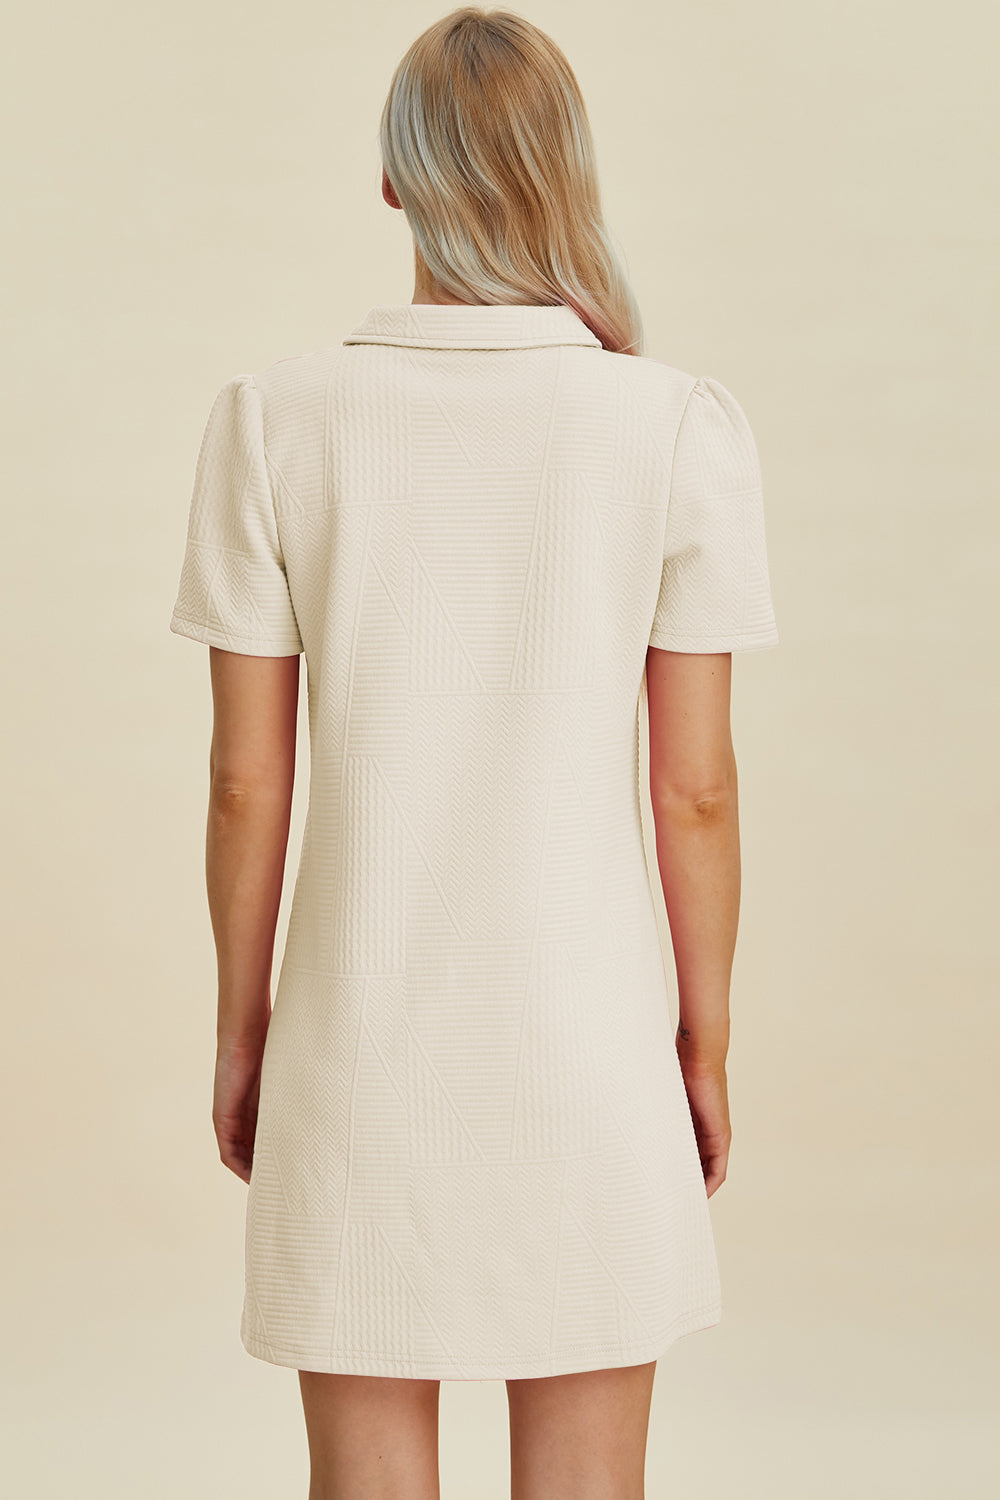 Ivory dress with textured pattern and classic collar